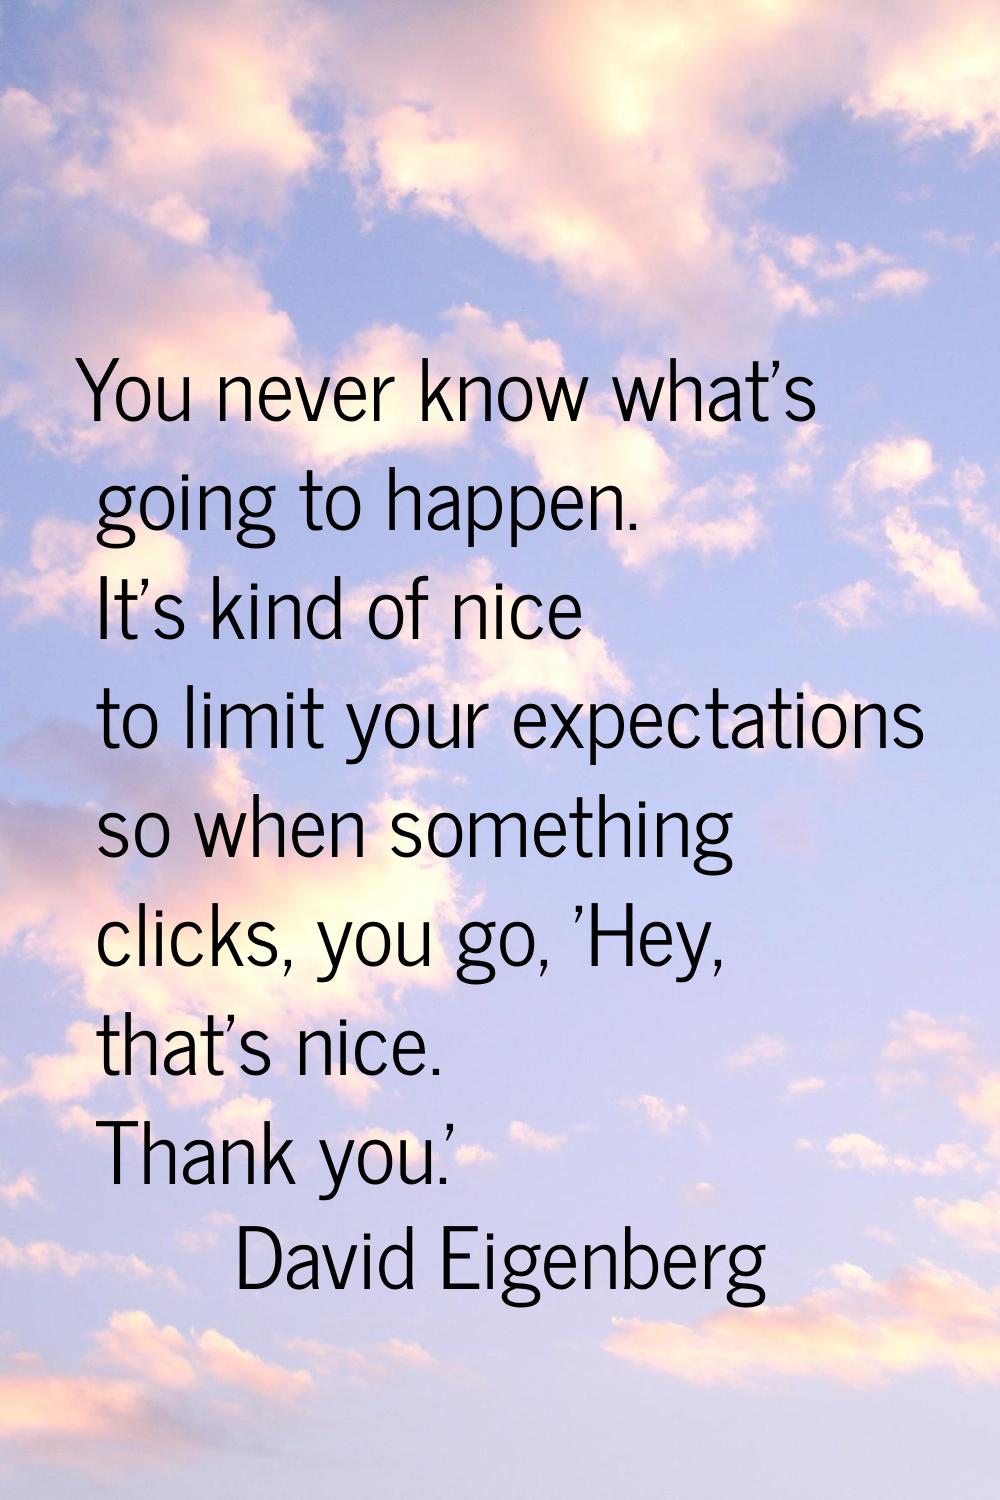 You never know what's going to happen. It's kind of nice to limit your expectations so when somethi